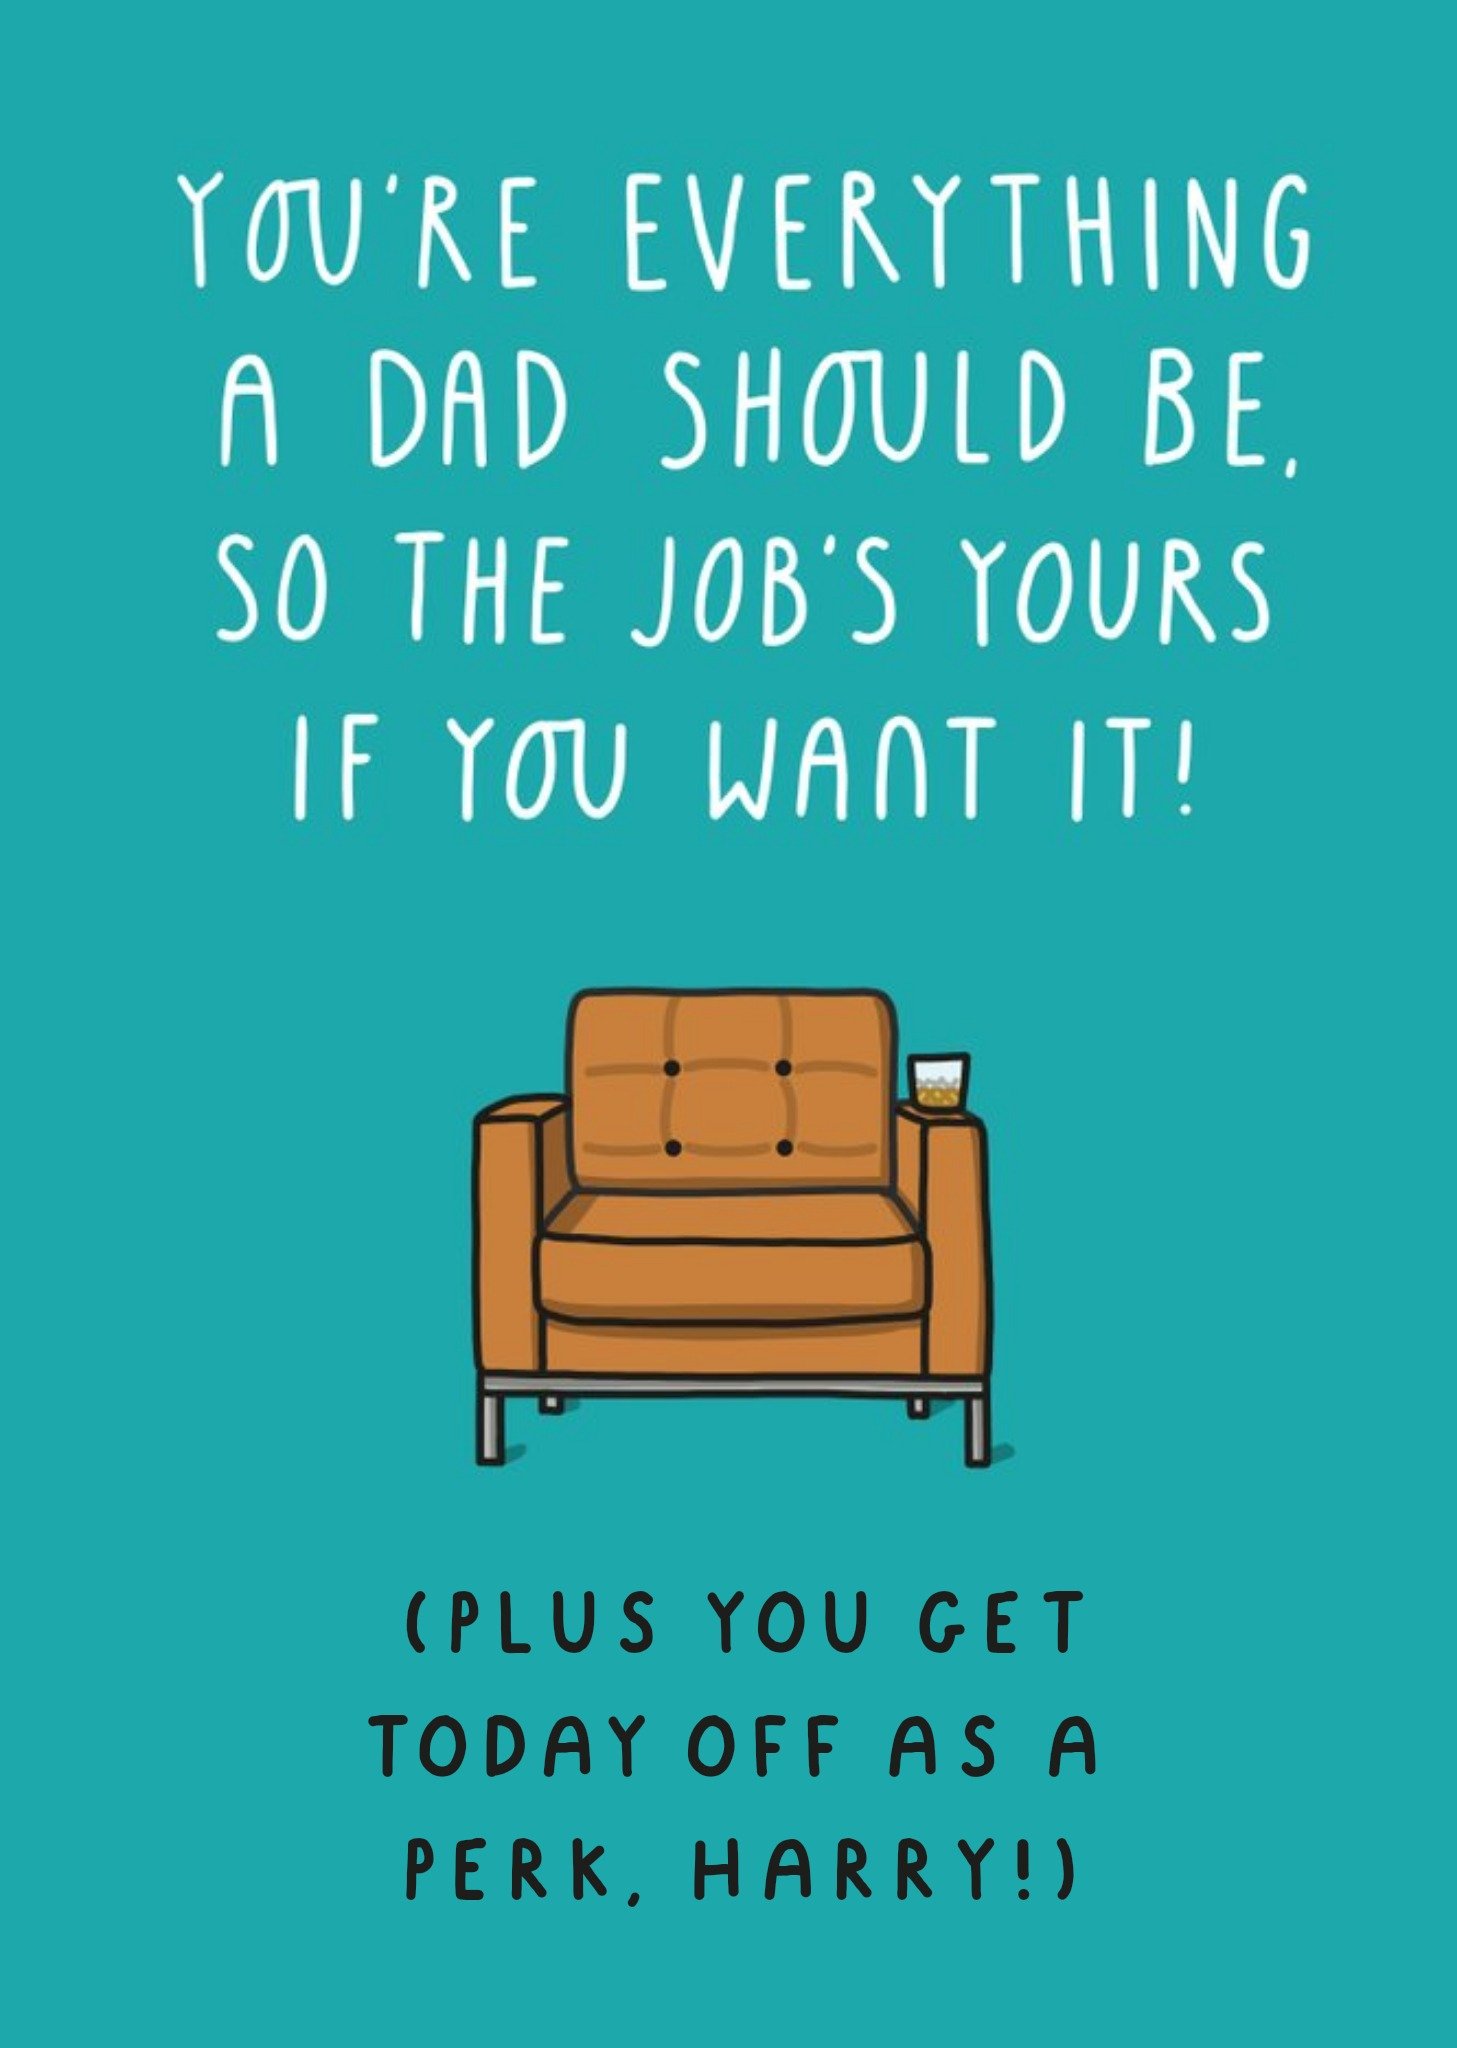 Moonpig Illustration Of An Armchair On A Teal Background Humorous Step Dad Father's Day Card Ecard